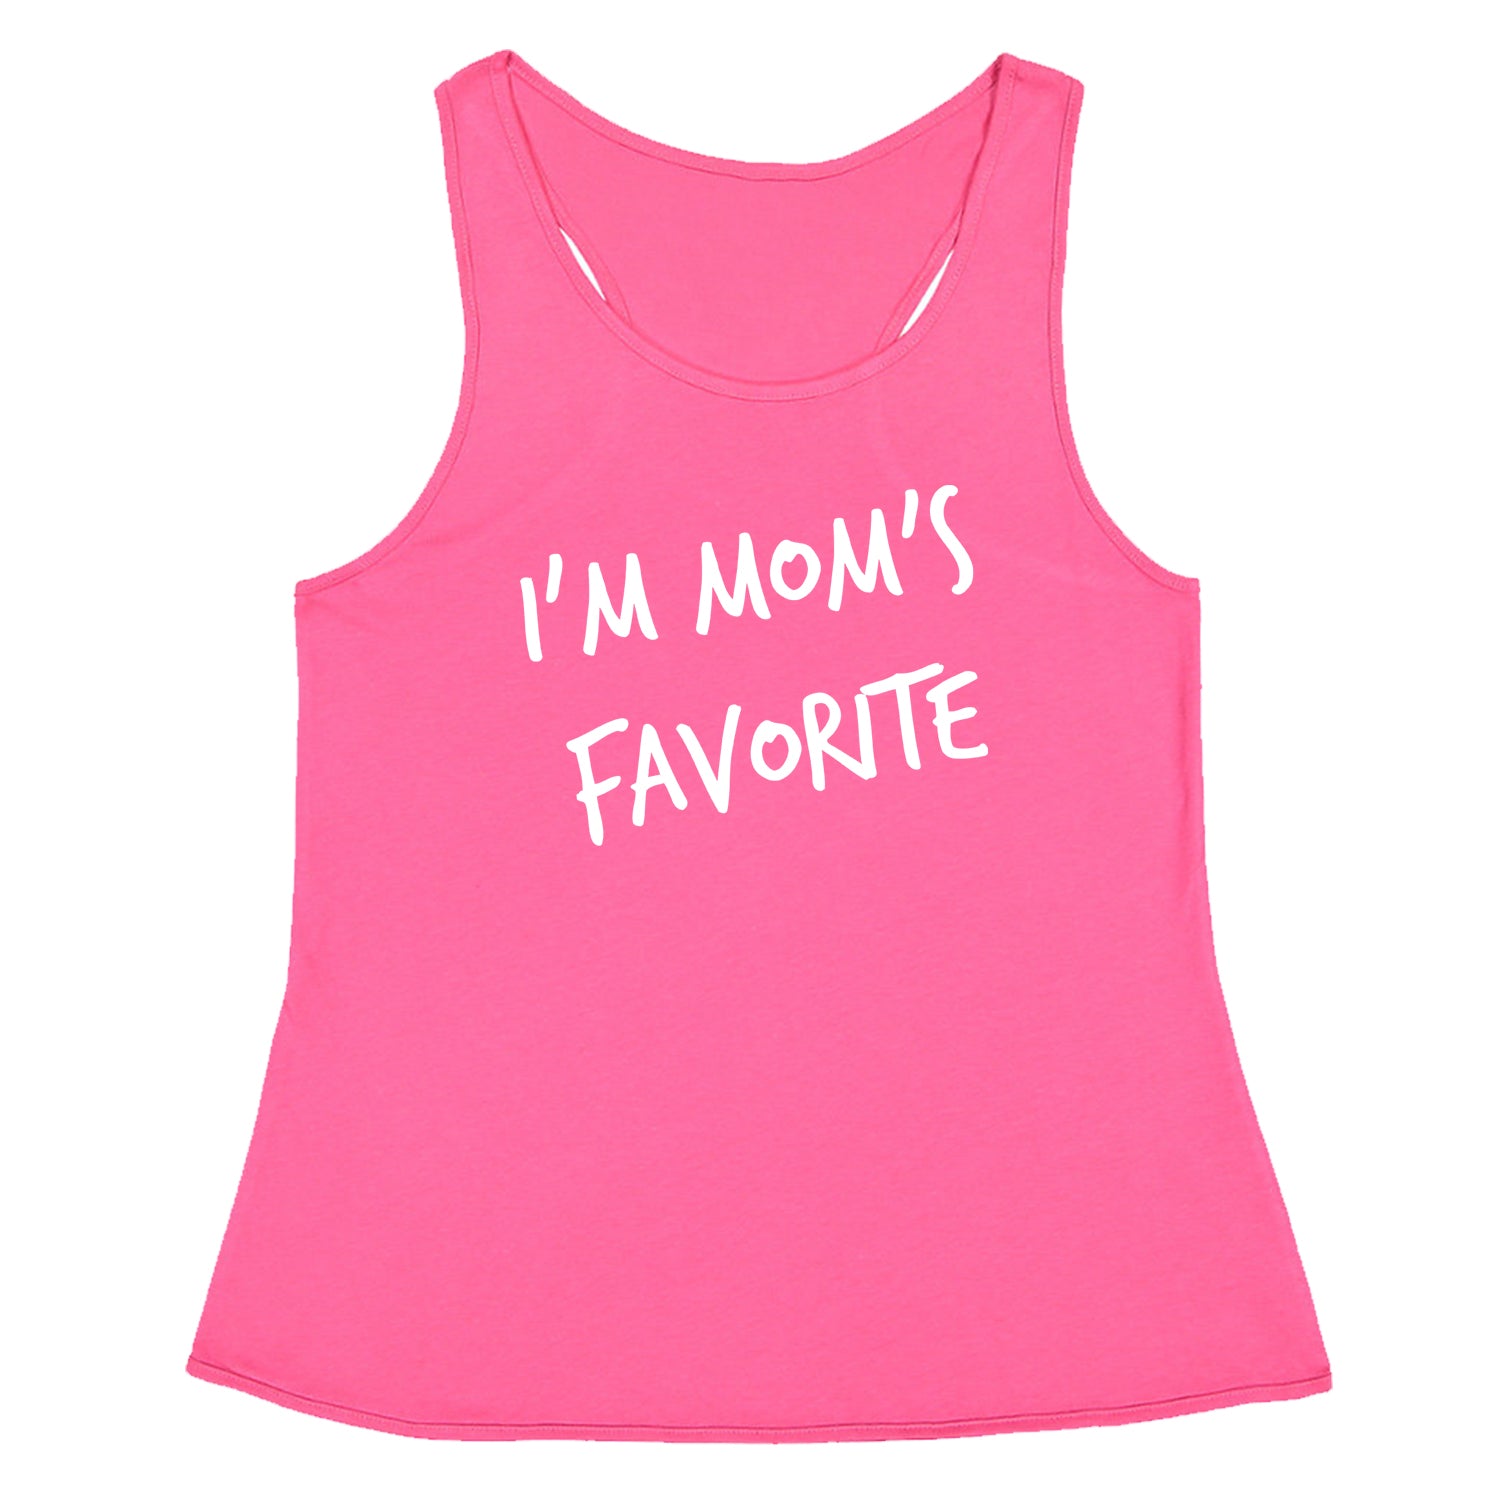 I'm Mom's Favorite Racerback Tank Top for Women bear, buck, mama, papa by Expression Tees